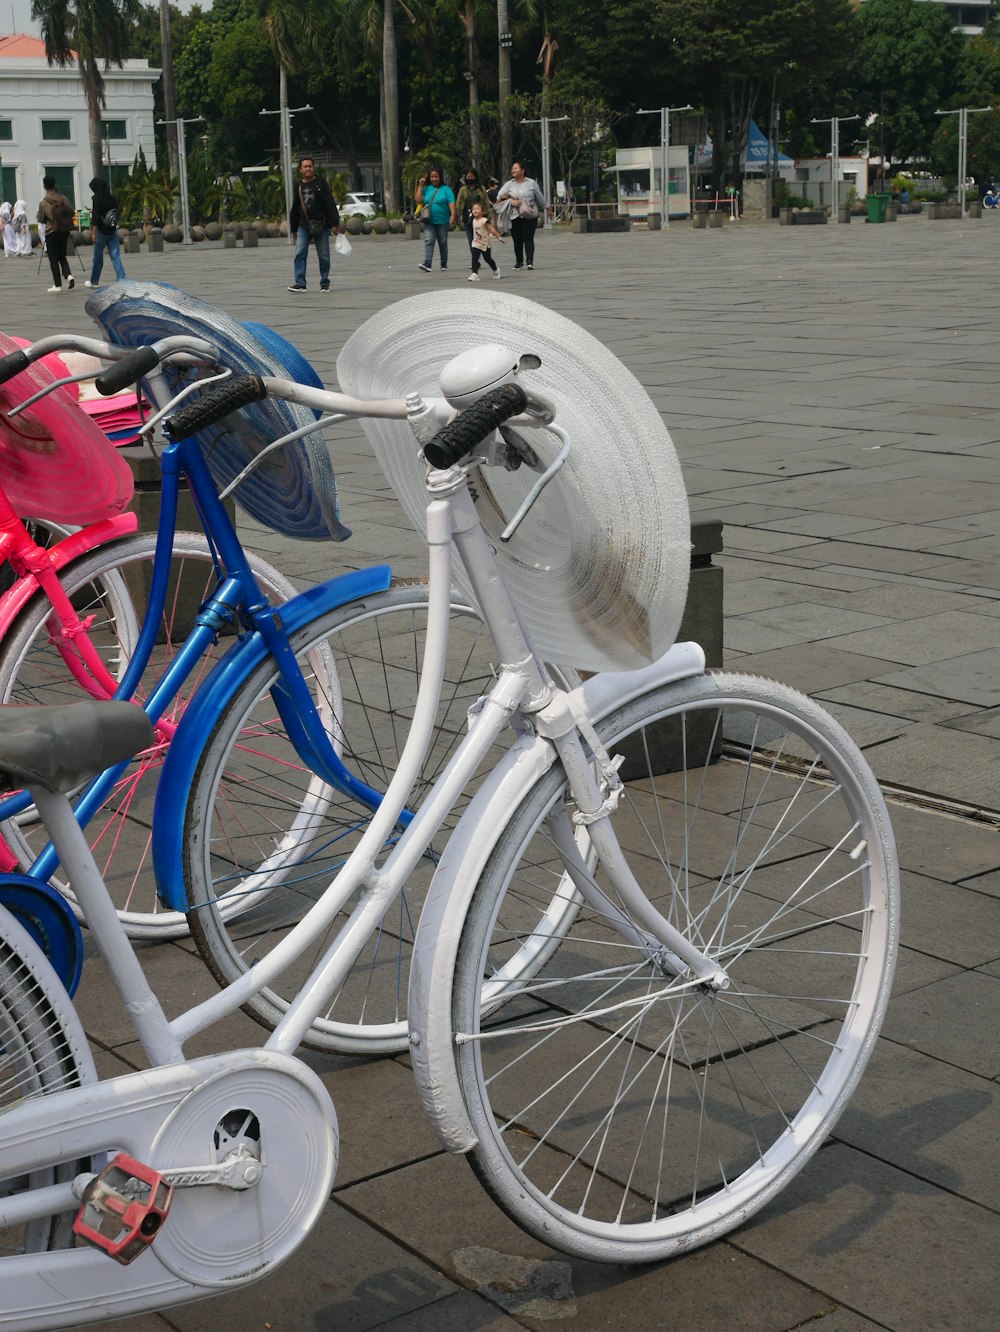 a row of colorful bicycles parked next to each other